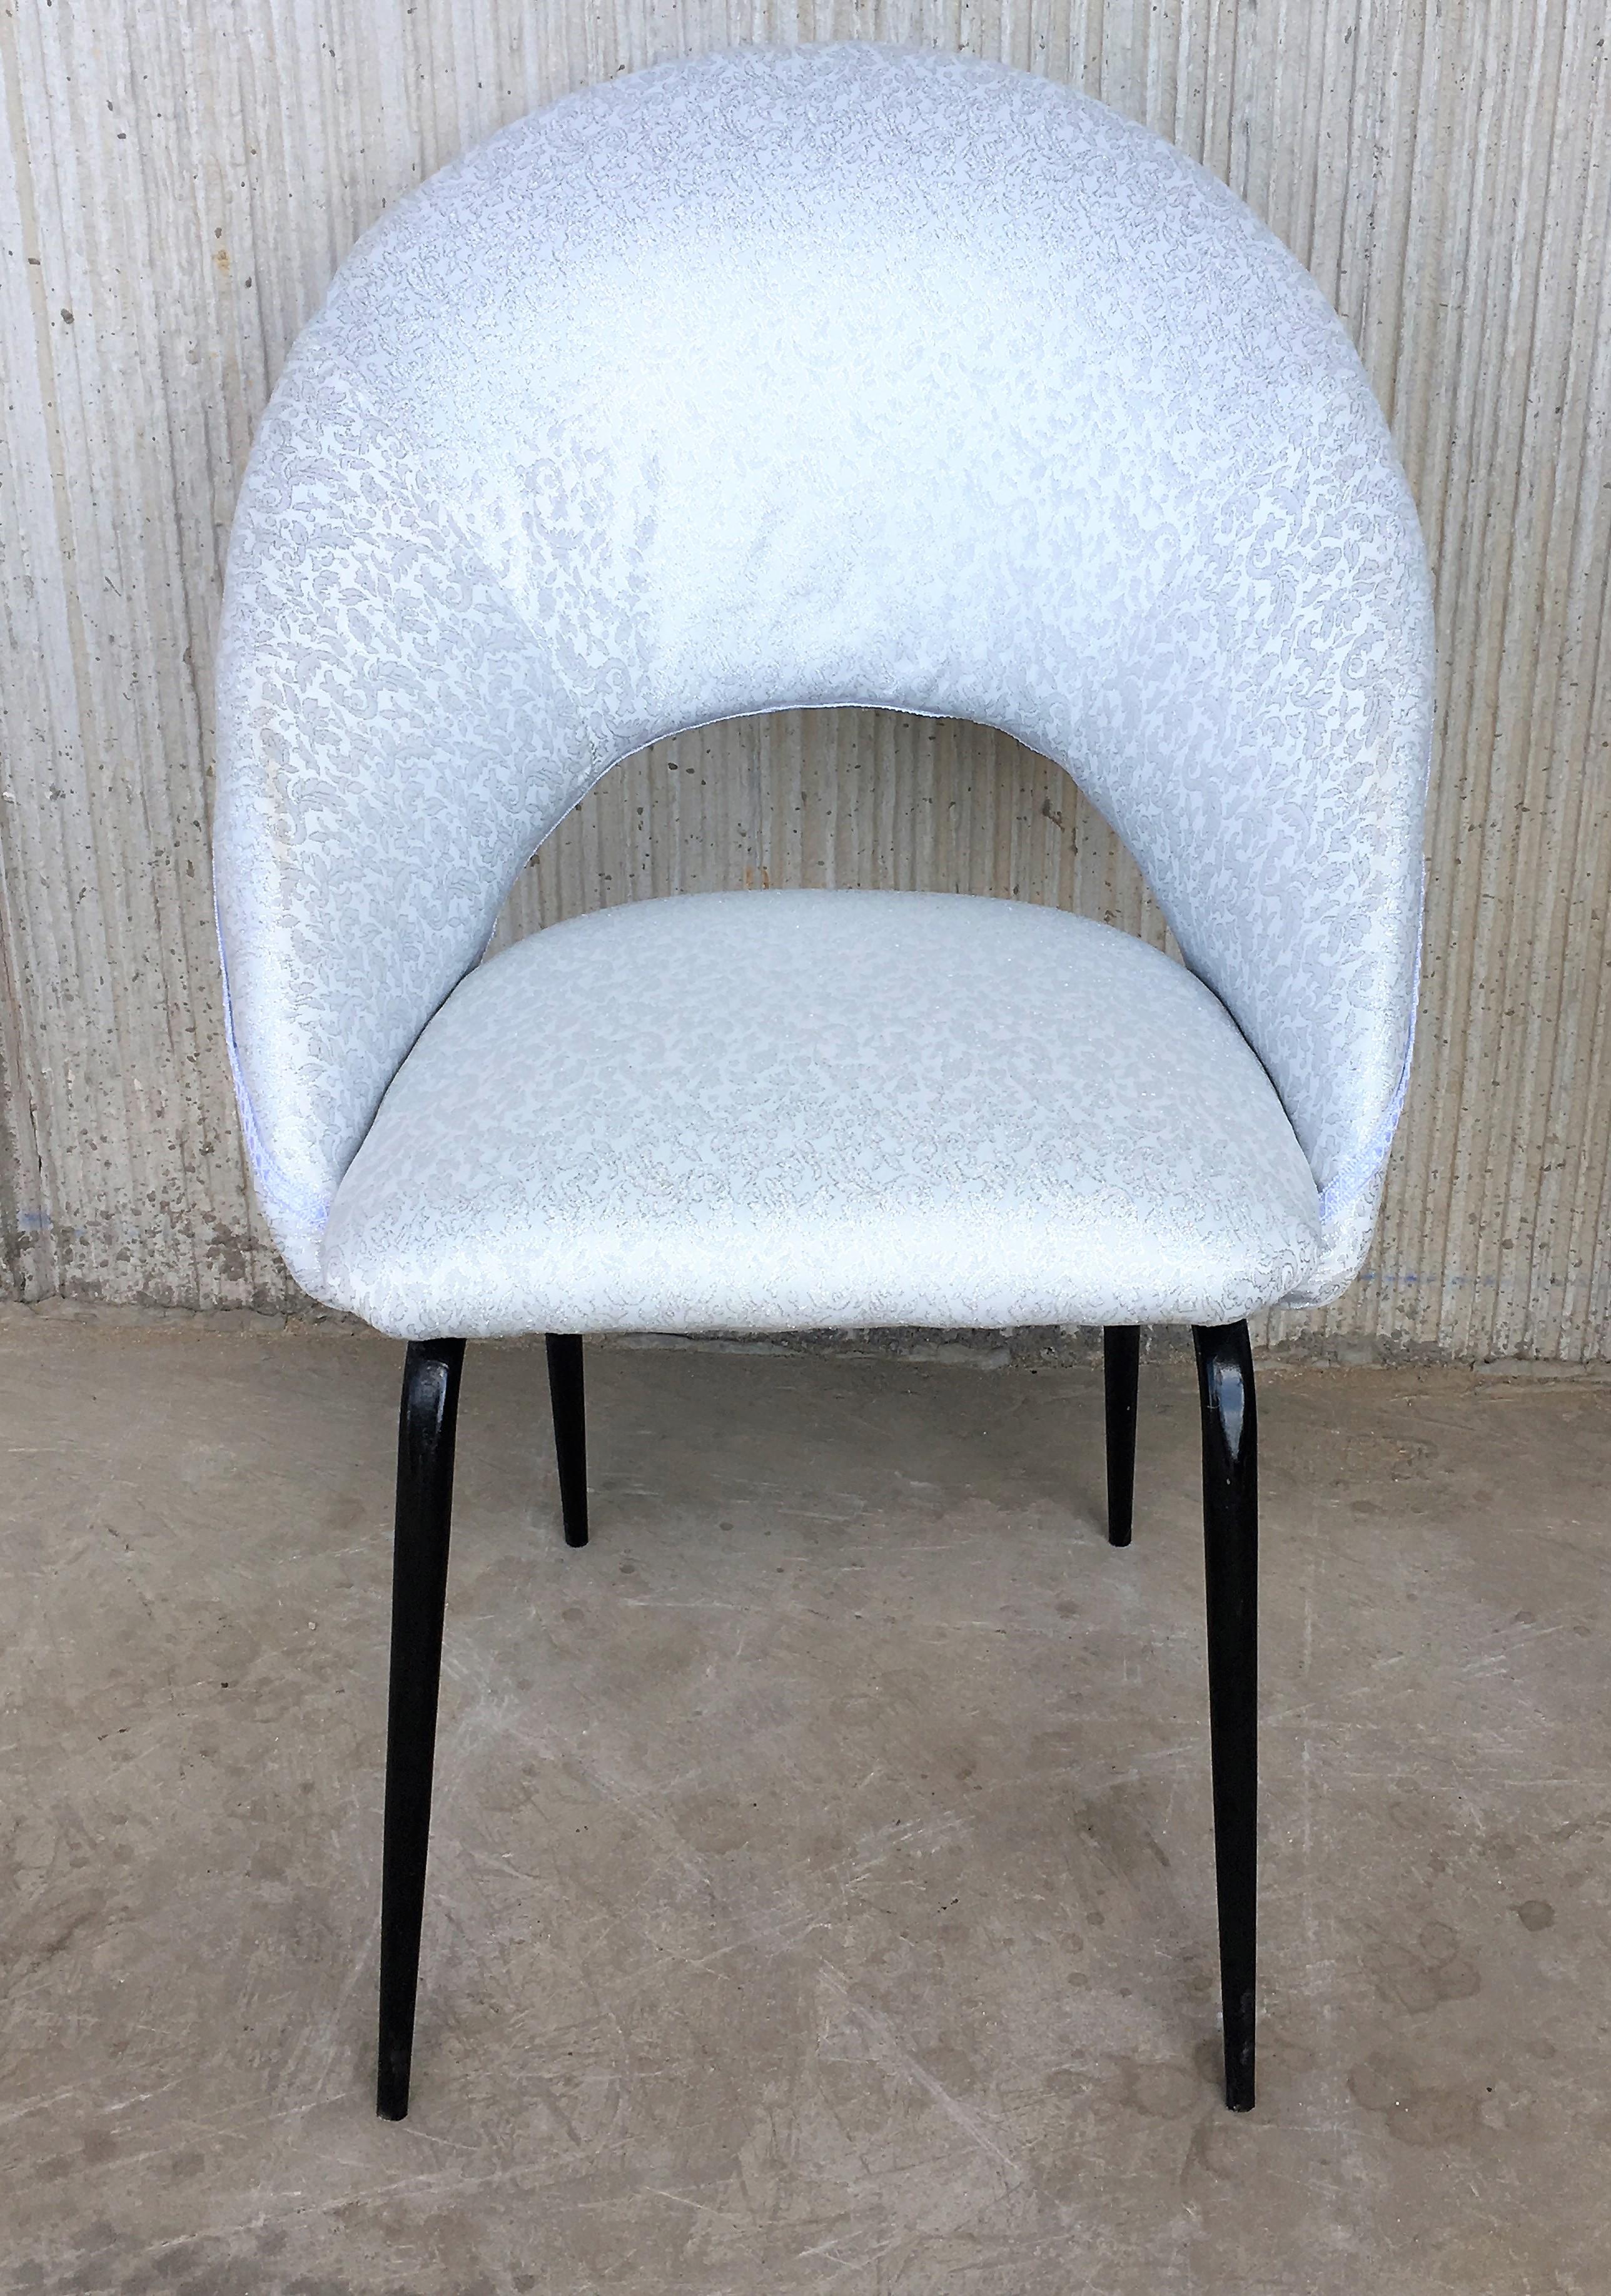 Metal Midcentury Pair of Italian Chairs with Arched Seats and Arched Backrest